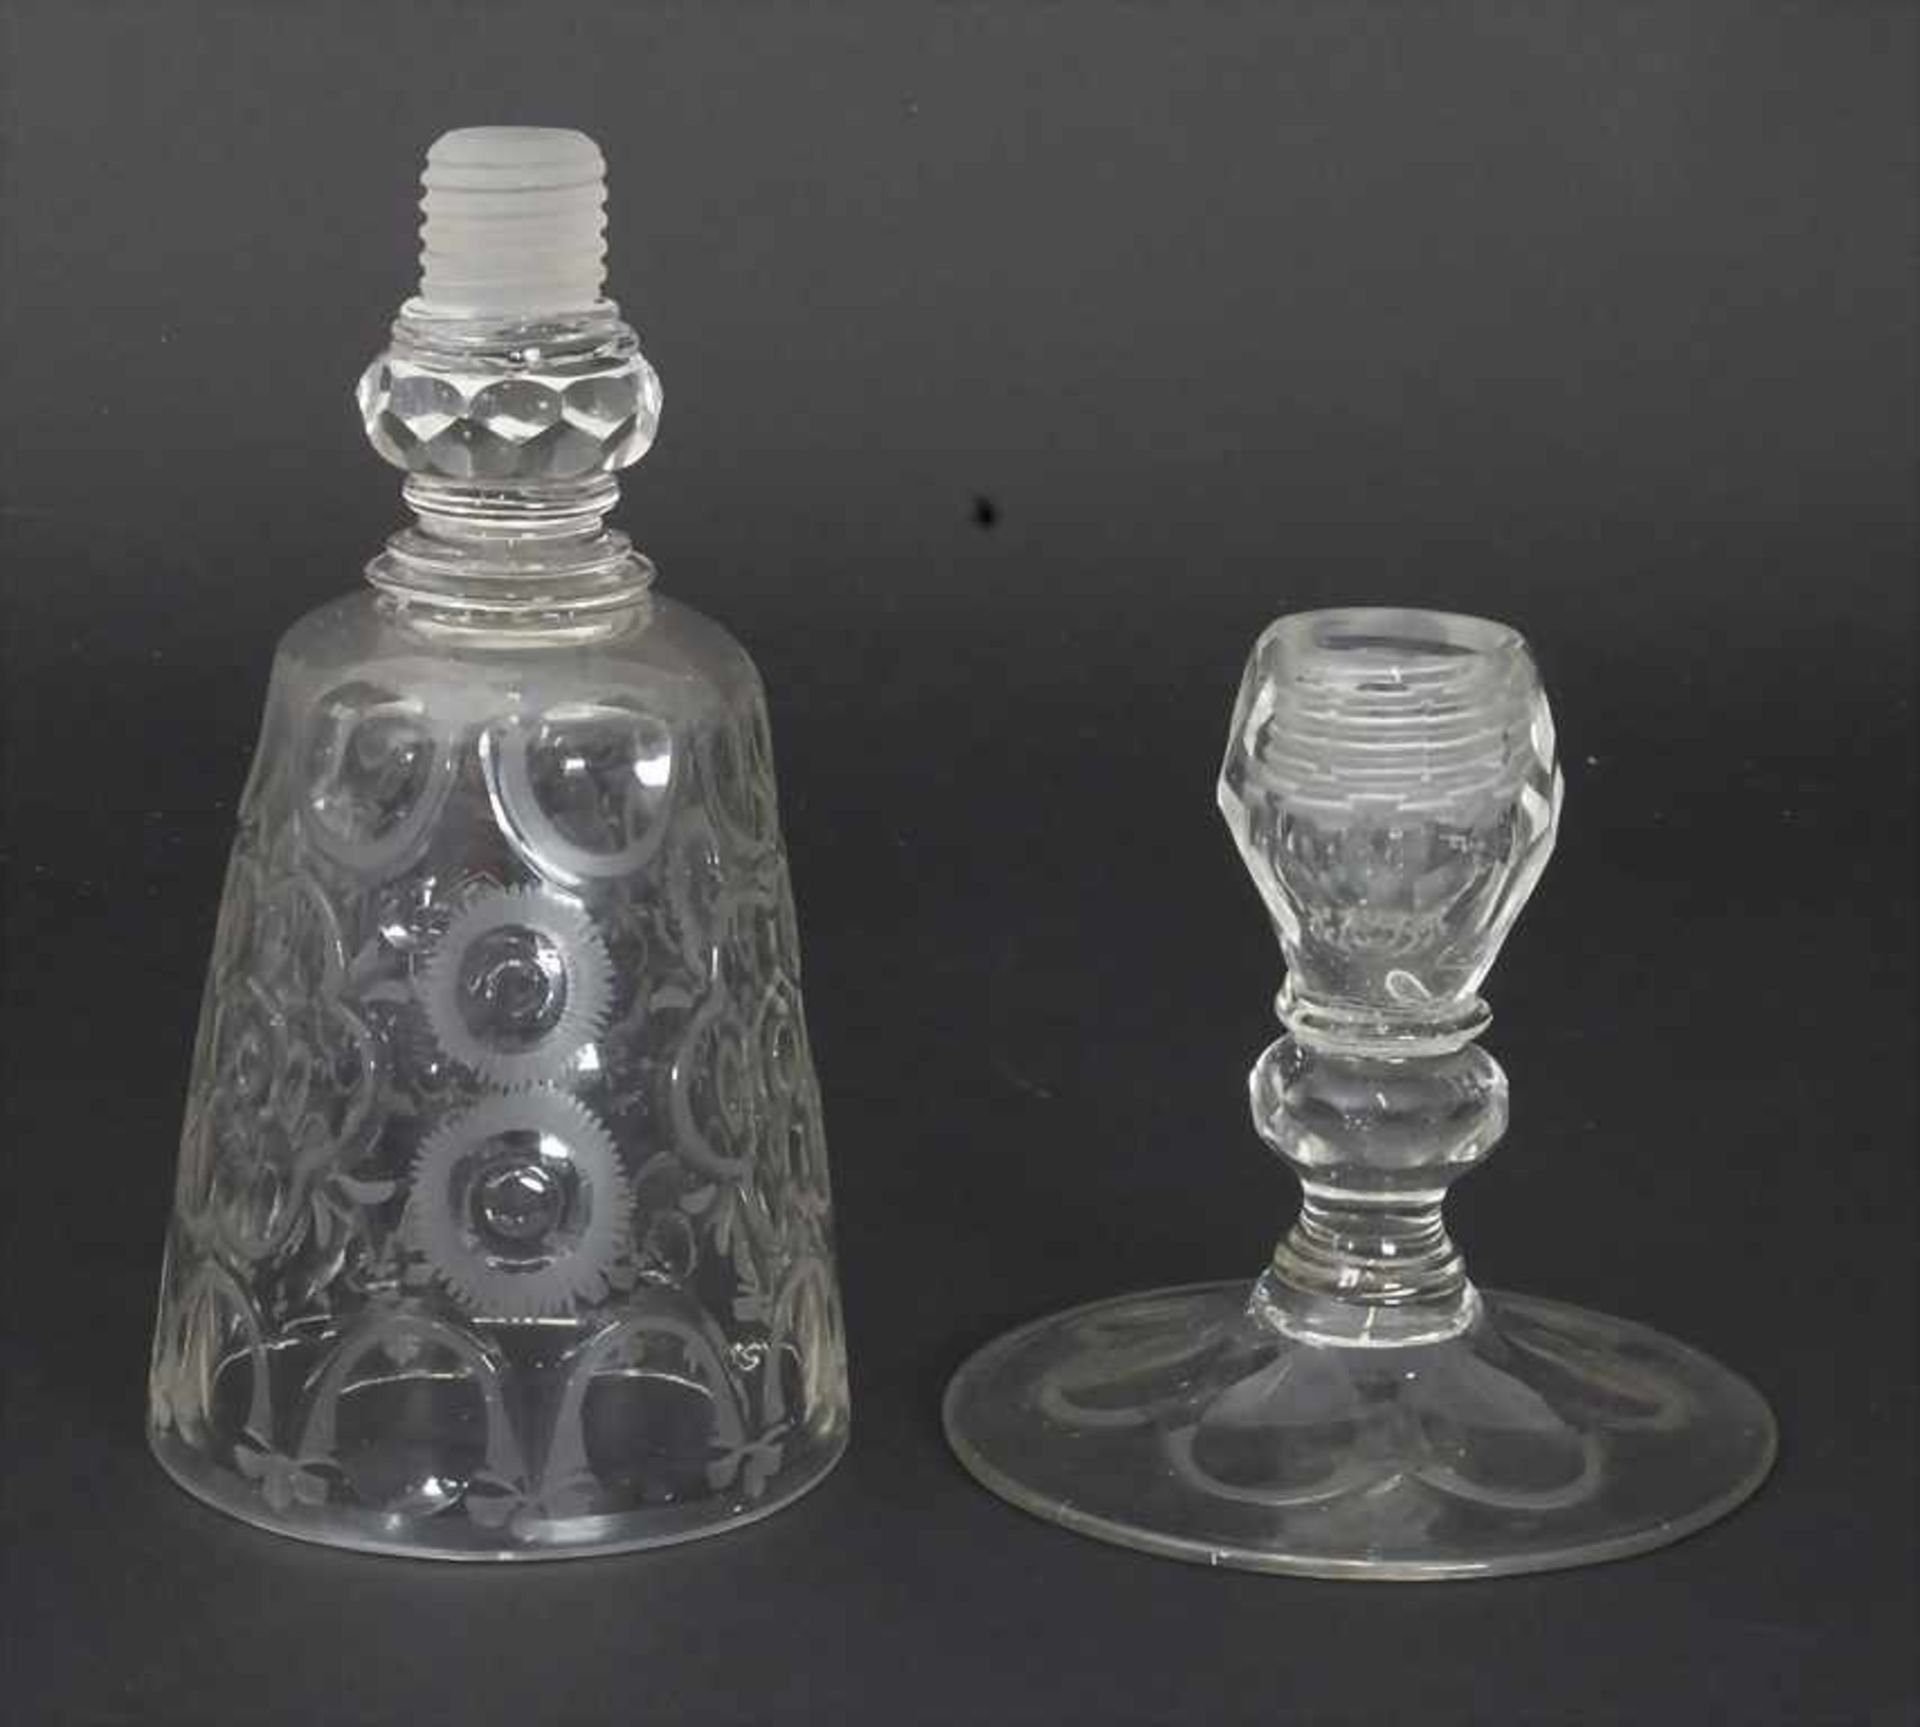 Seltener Schraubpokal / A rare glass chalice, Schlesien, 18. Jh.Material: farbloses Glas, - Image 6 of 6